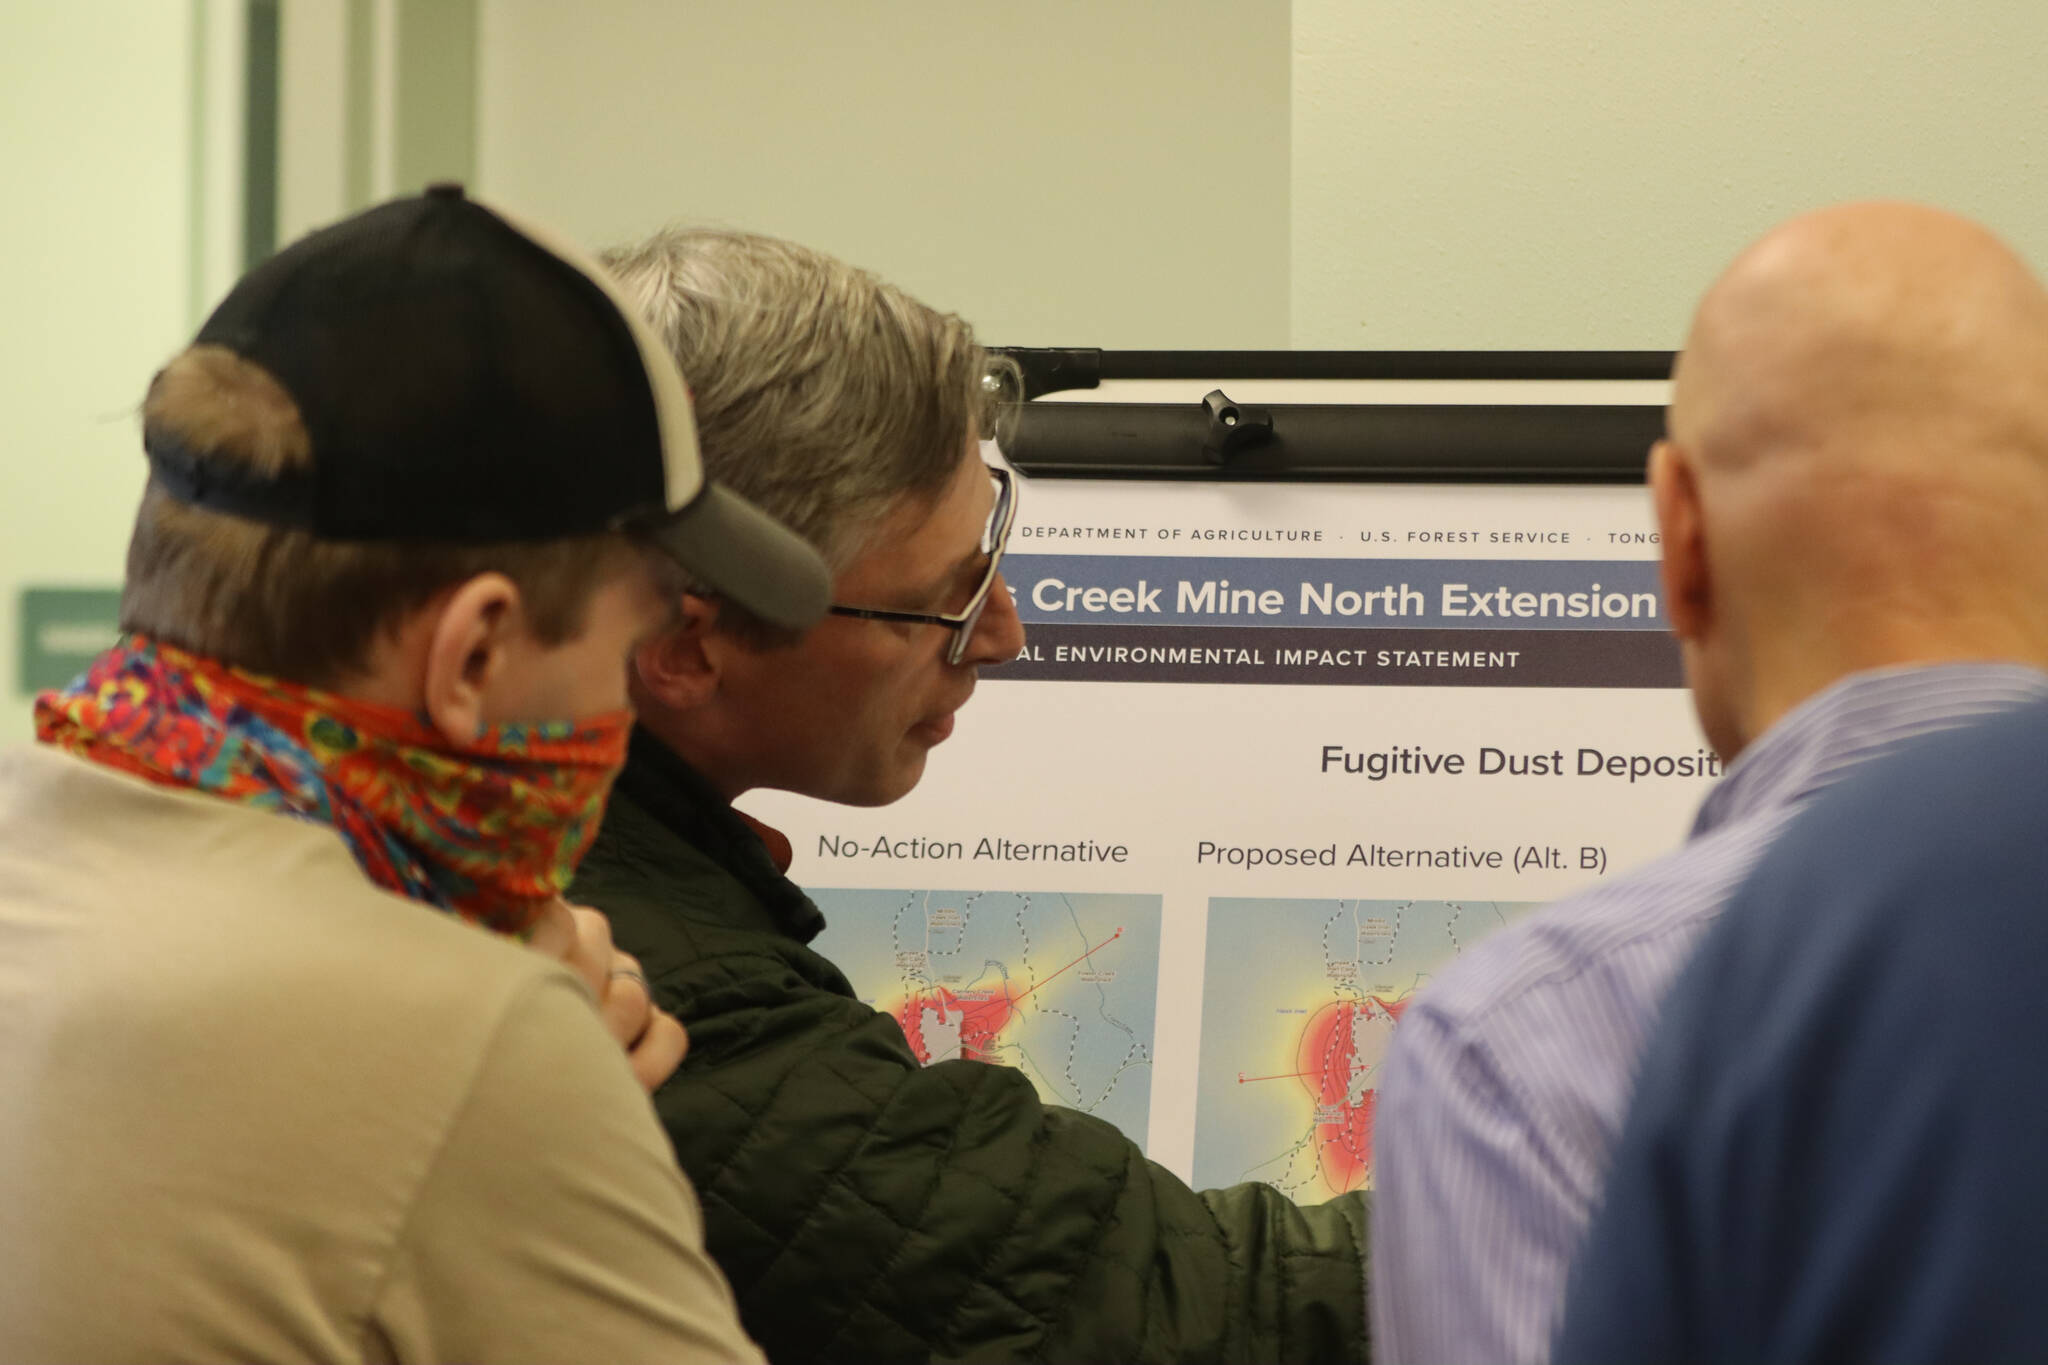 Members of the Juneau Forest Service along with Hecla staff answer questions posed by the public regarding the Greens Creek Mine expansion alternatives on Wednesday during an open house hosted by the Juneau Ranger District. (Jonson Kuhn / Juneau Empire)